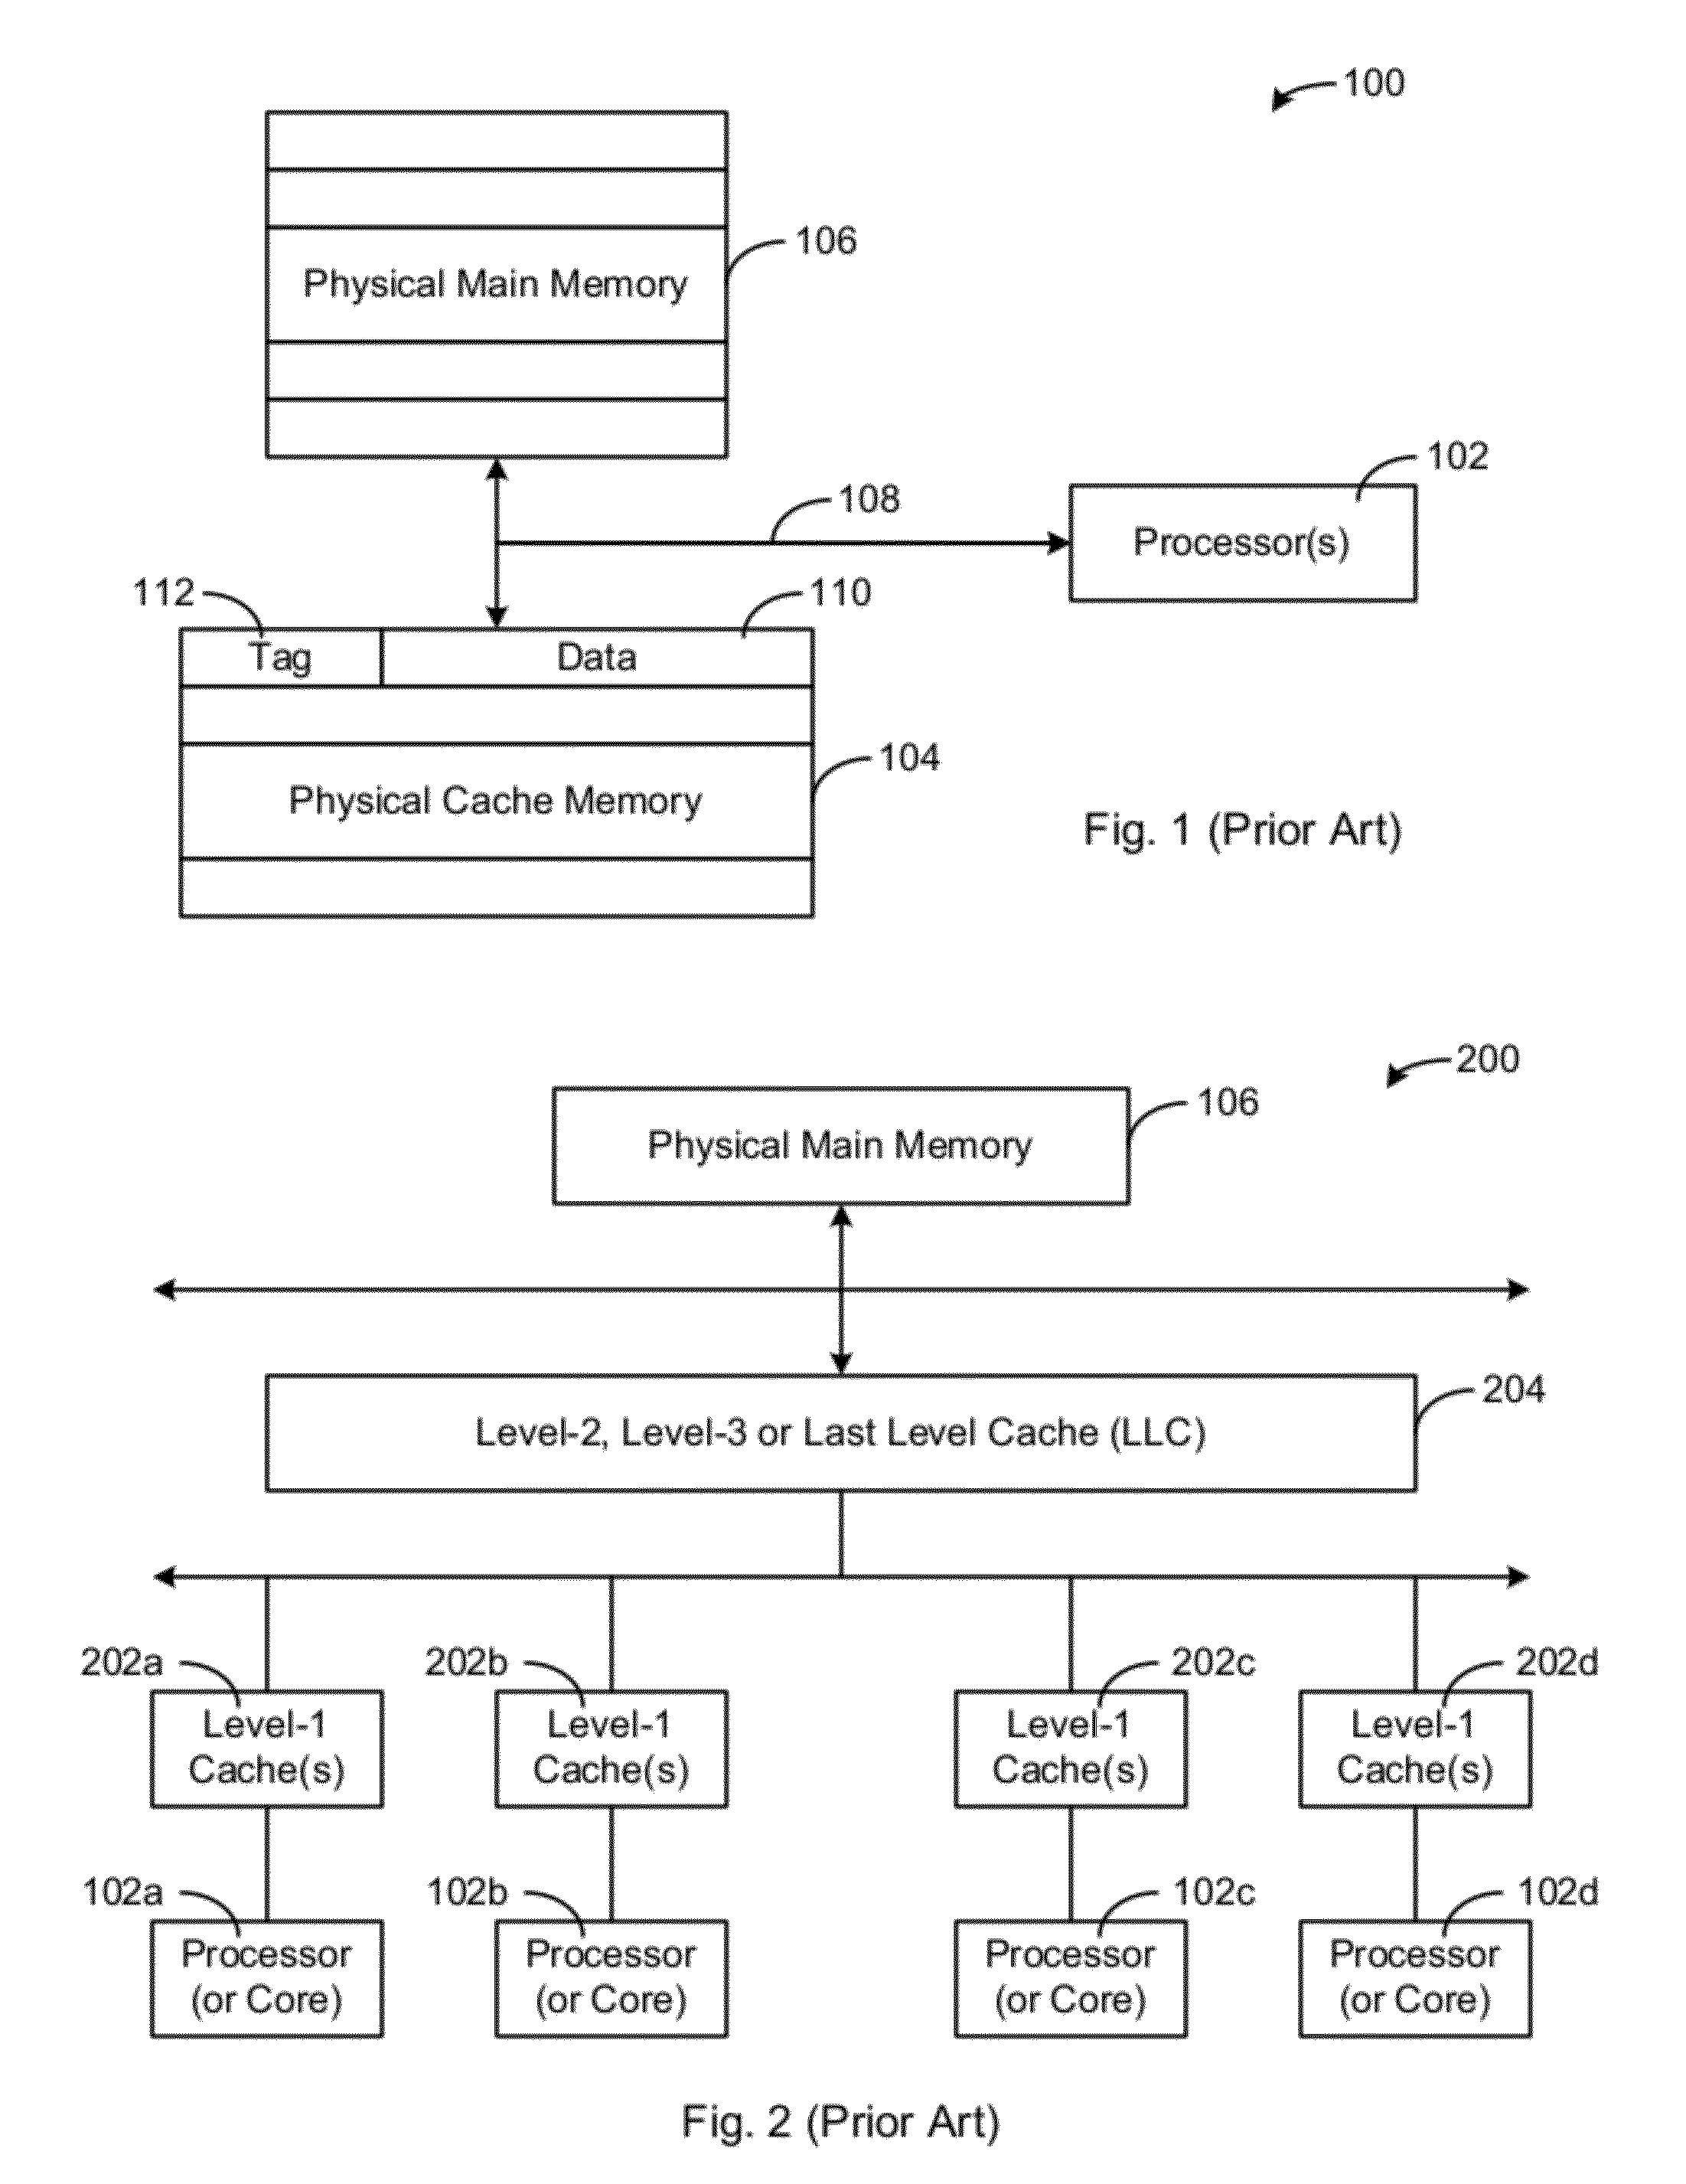 Method and apparatus for improving computer cache performance and for protecting memory systems against some side channel attacks